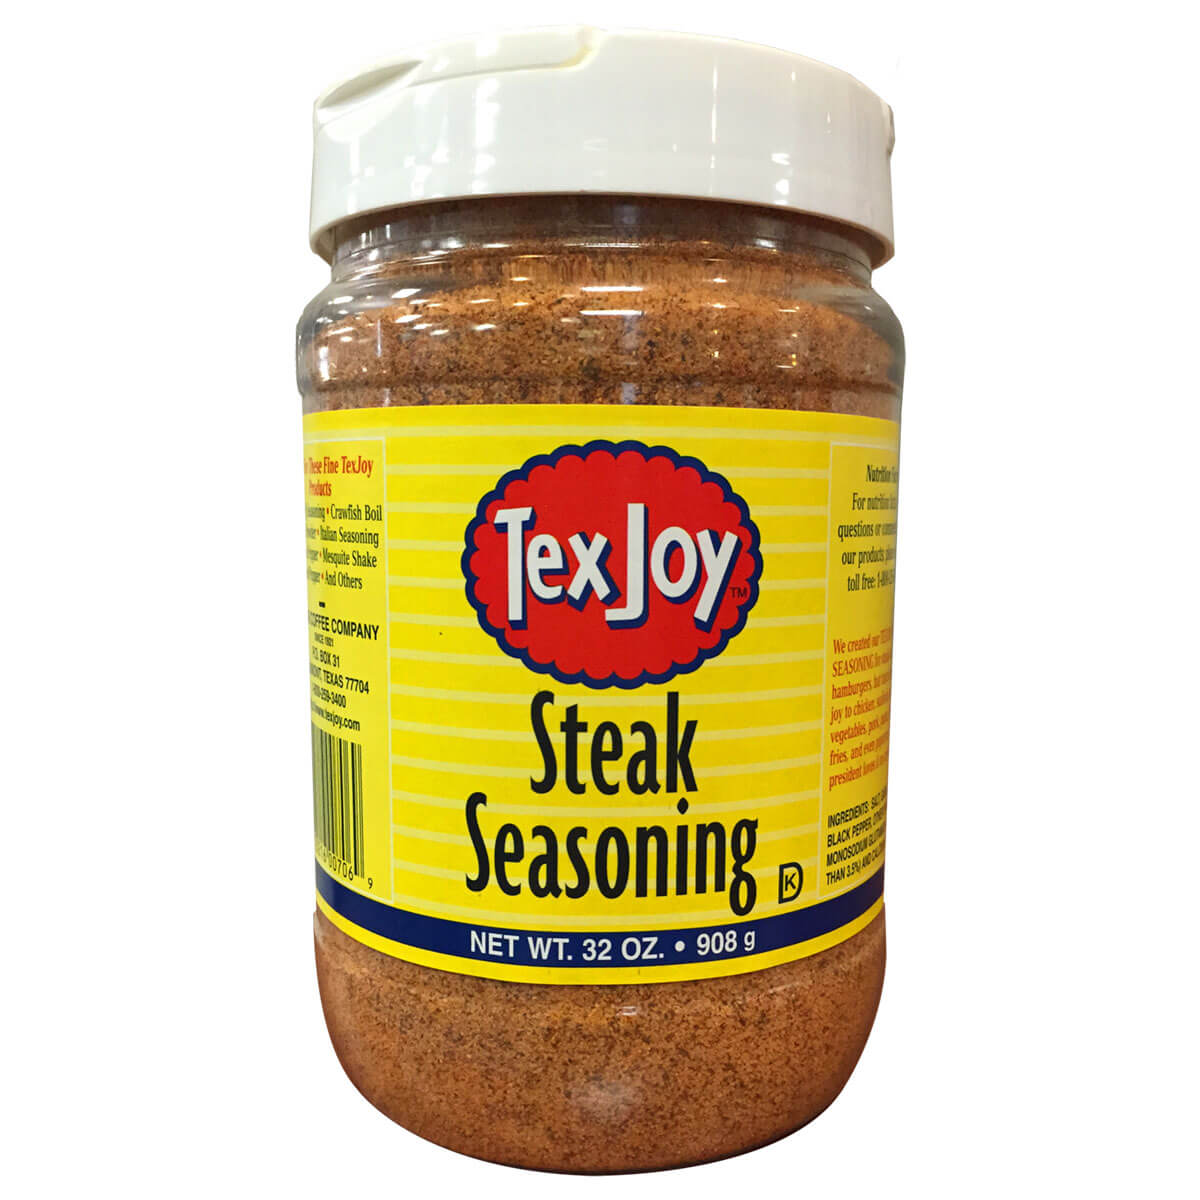 http://www.texjoy.com/Shared/Images/Product/Steak-Seasoning-32-oz/texjoy-steak-seasoning-32oz.jpg